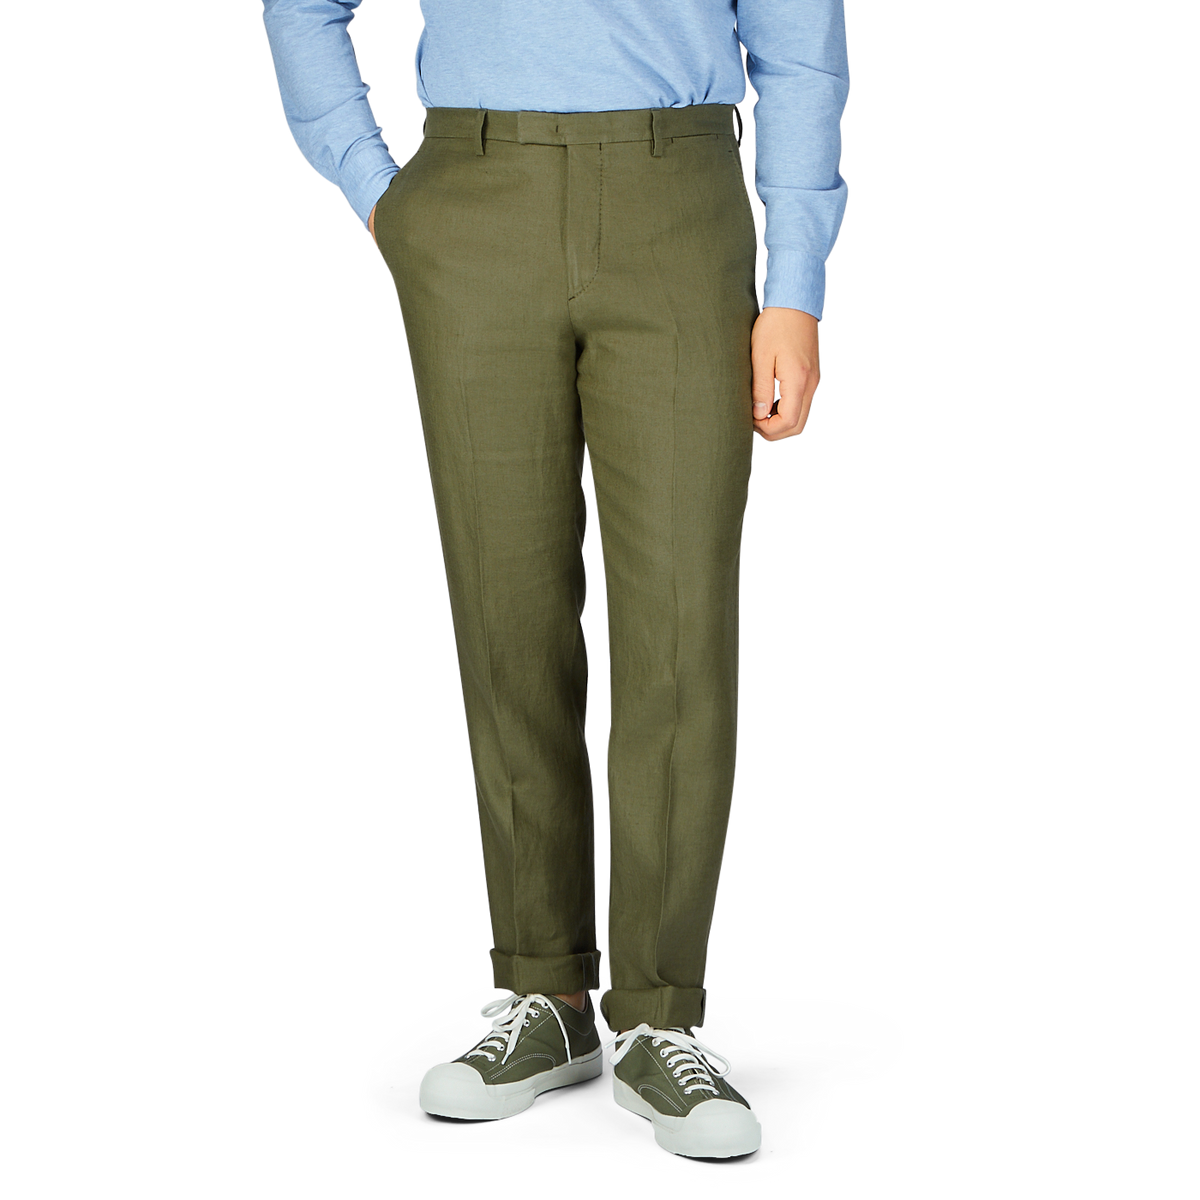 Olive green tapered leg trousers (Green Washed Irish Linen Trousers by Boglioli) paired with casual sneakers and a blue shirt.